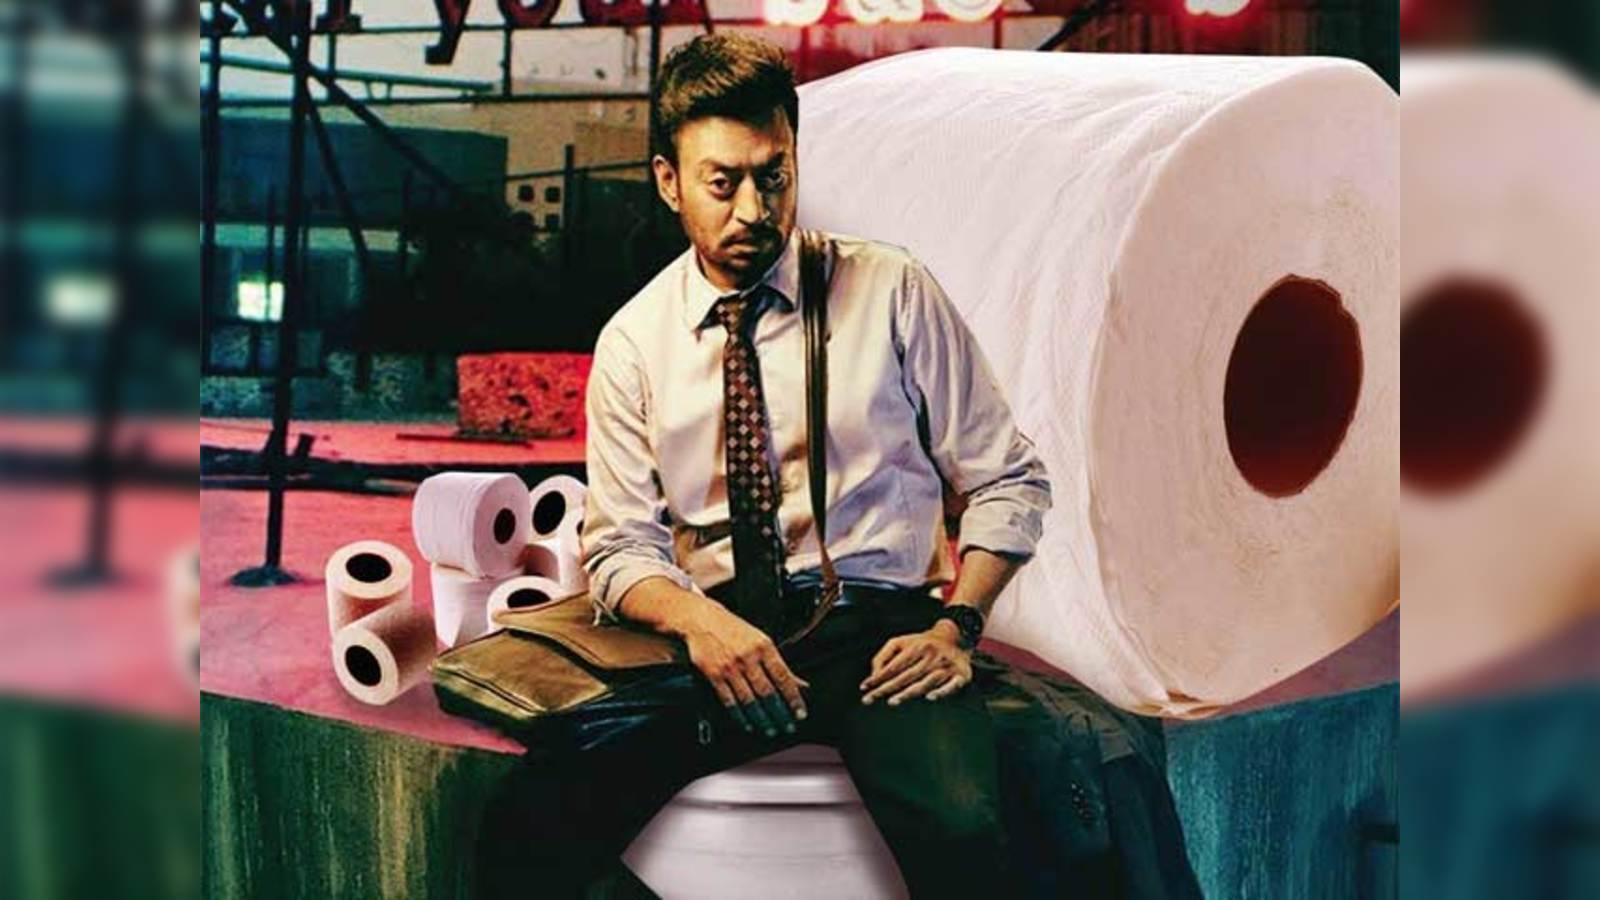 Toilet paper: How the toilet paper habit can grow, and why India will  remain a challenge - The Economic Times